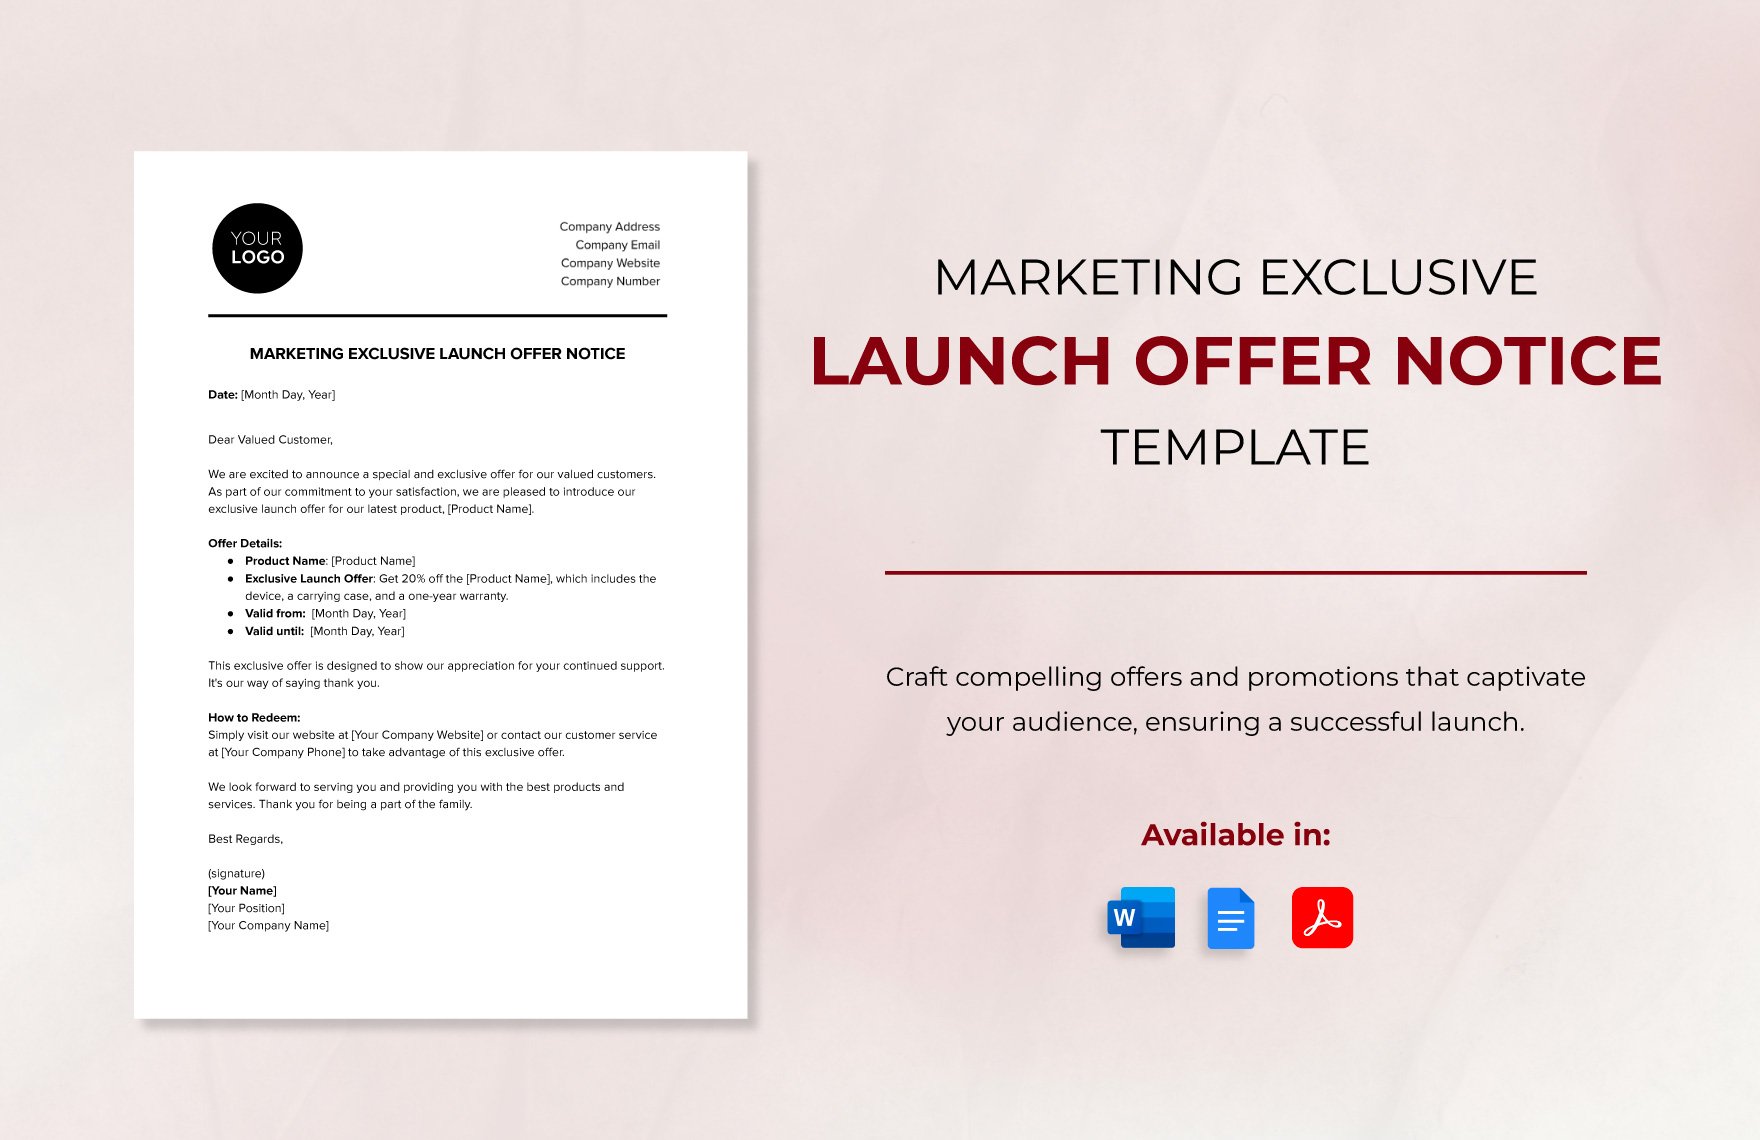 Marketing Exclusive Launch Offer Notice Template in Word, Google Docs, PDF